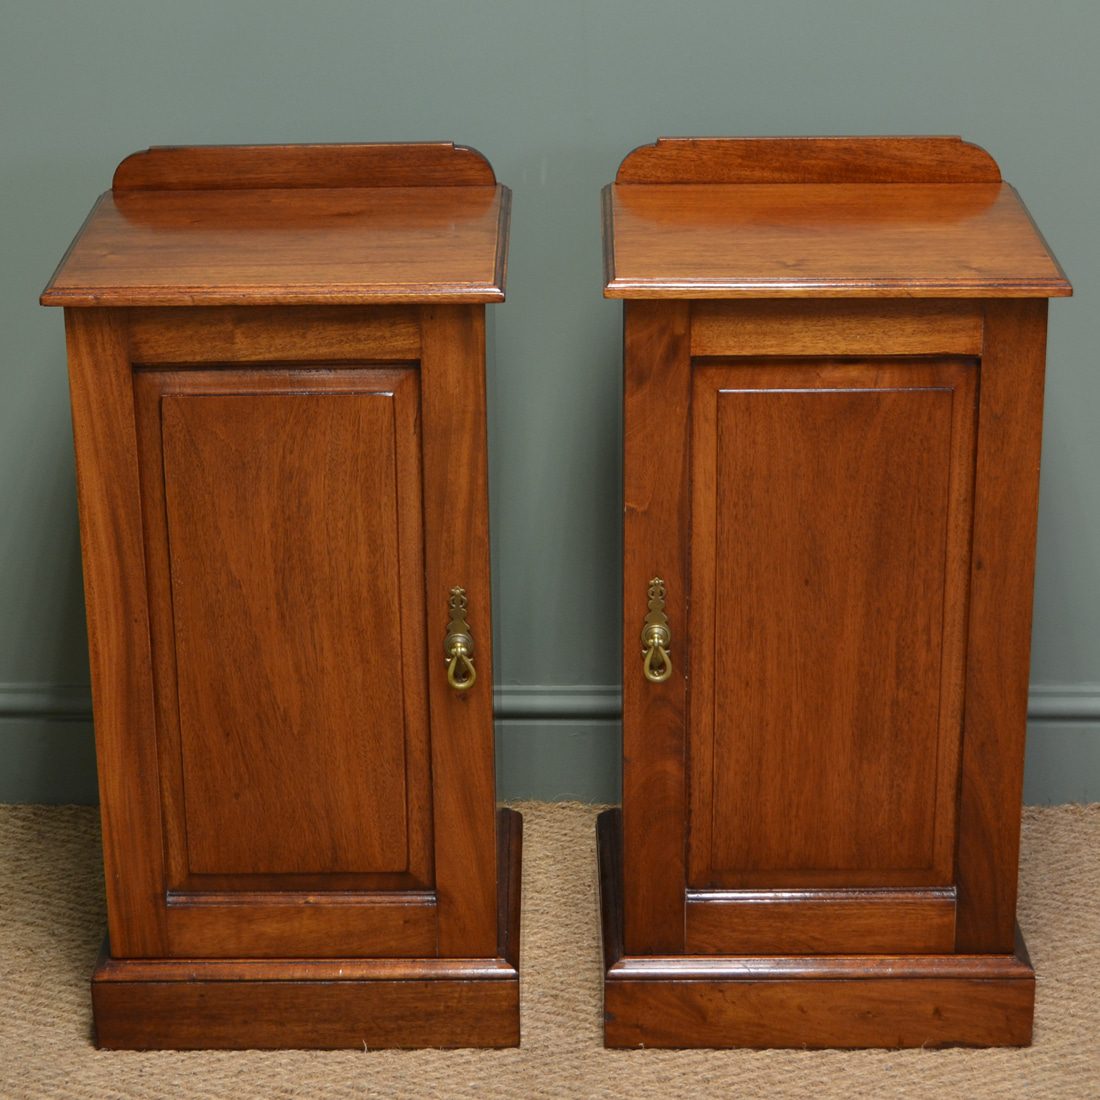 Stunning Pair Of Walnut Maple & Co Antique Victorian Bedside Cabinets